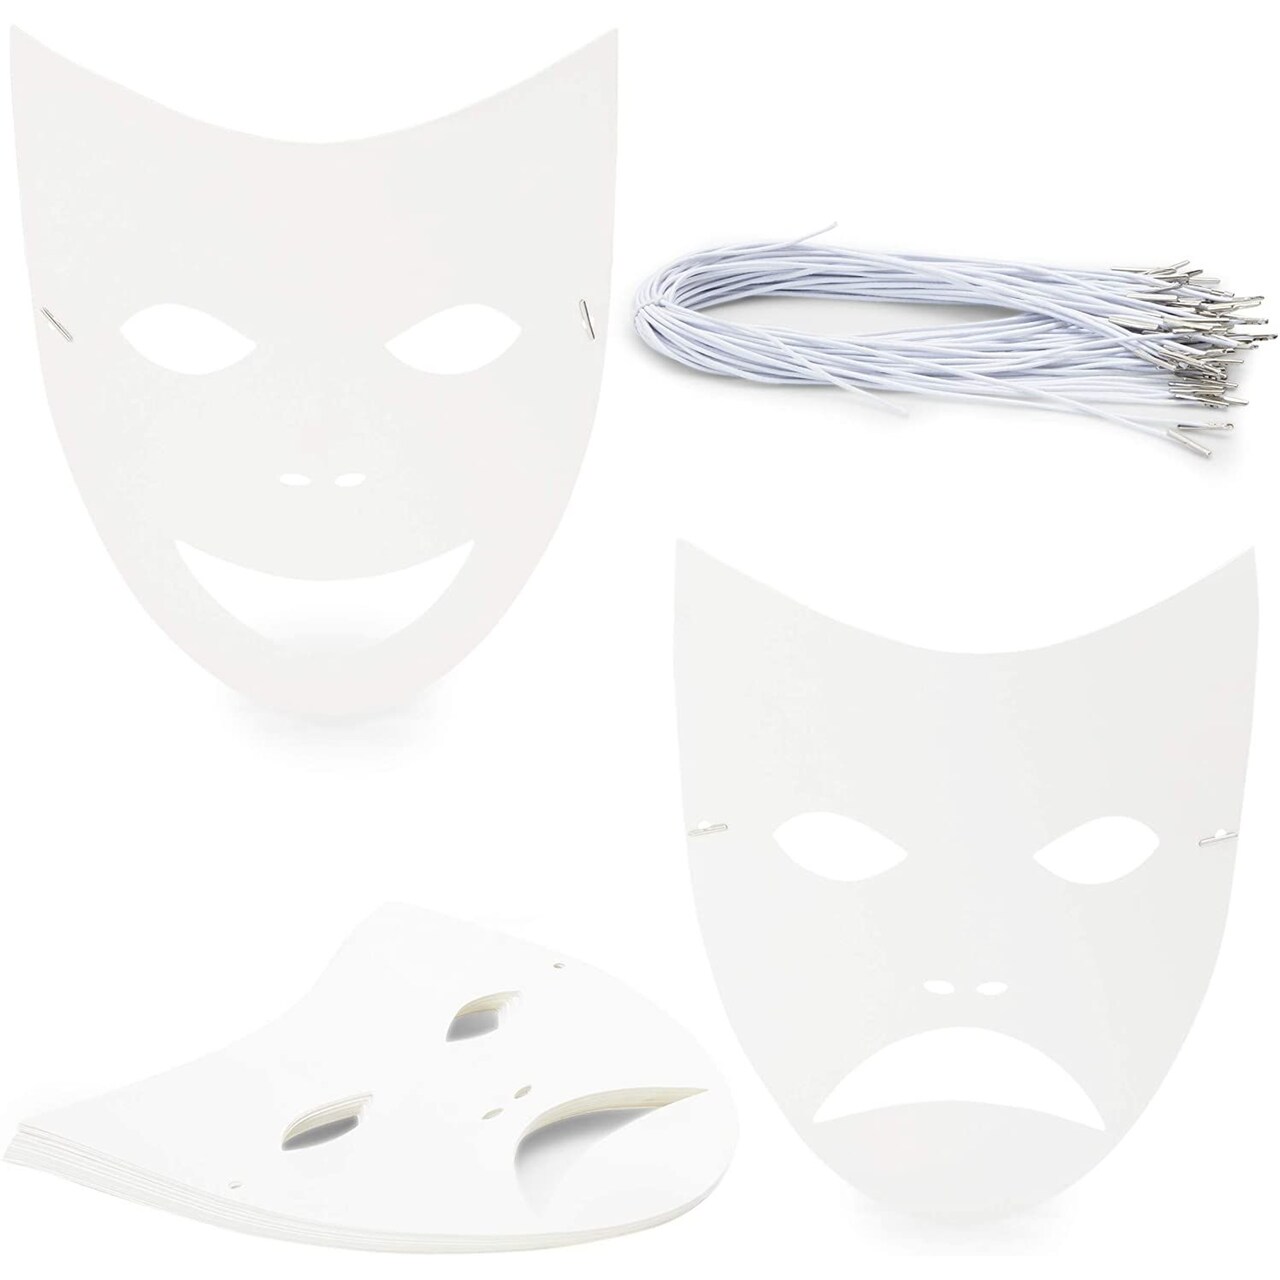 Blank DIY Masquerade Mask for Costume Party (48 Pack) White